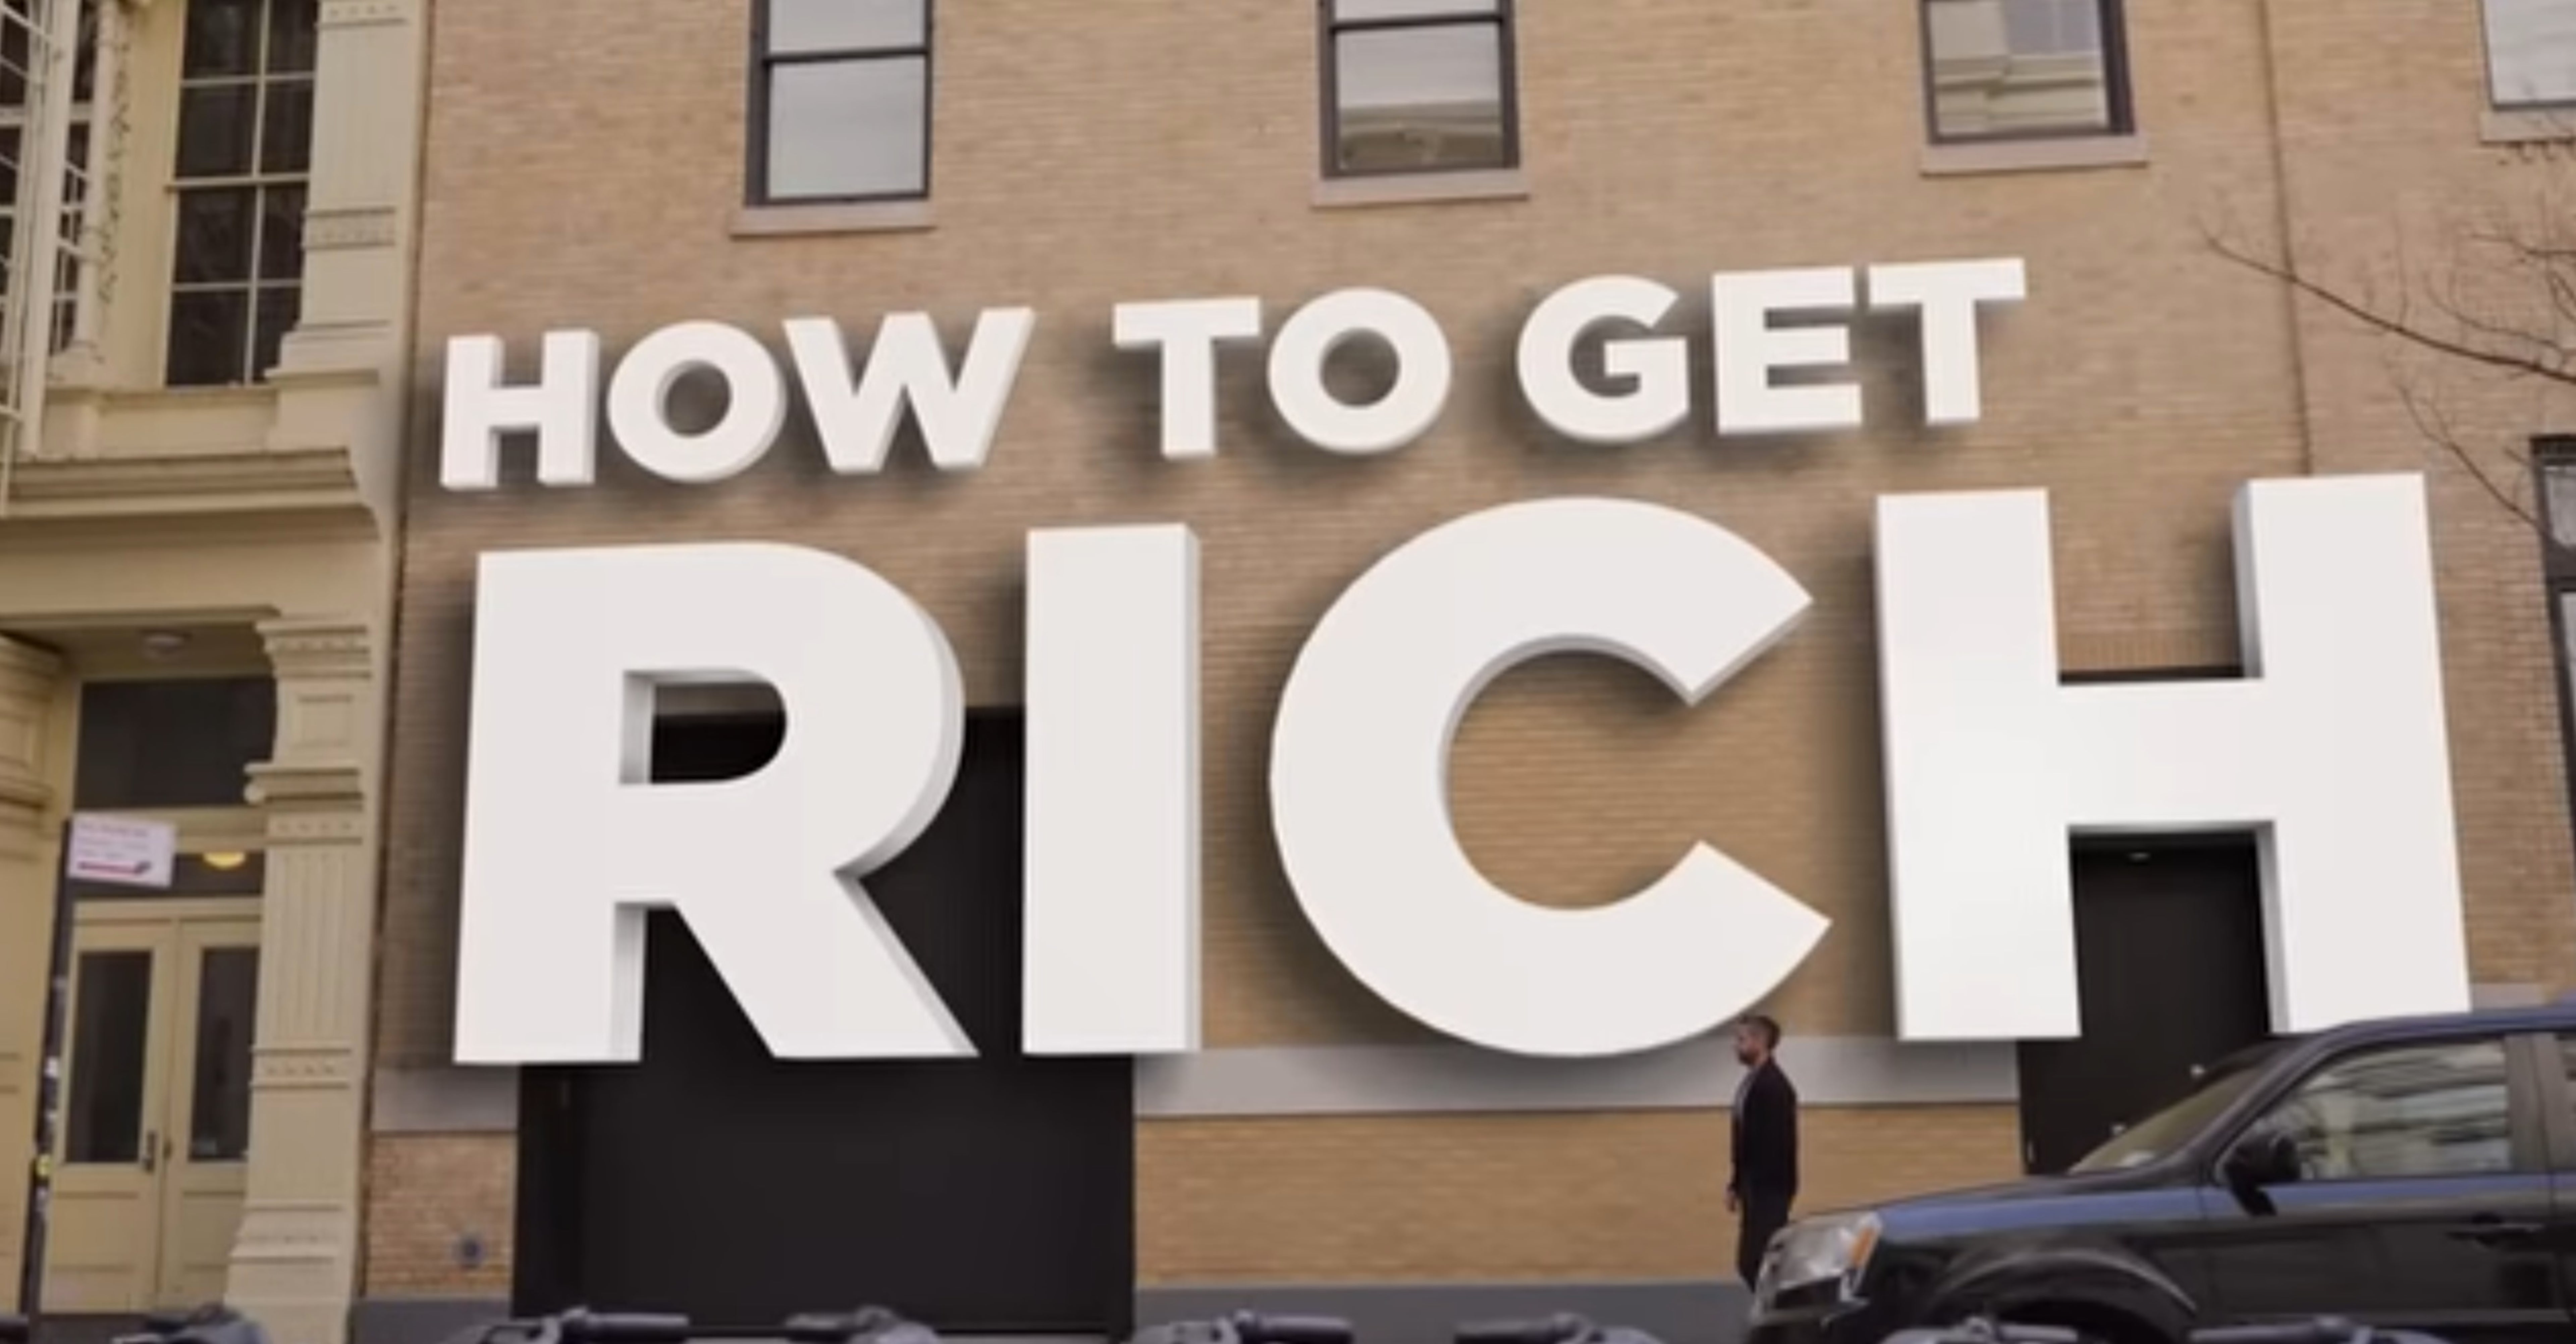 Netflix&#39;s New Self-Help Series Shows Viewers &#39;How To Get Rich&#39; - Here Are The Details